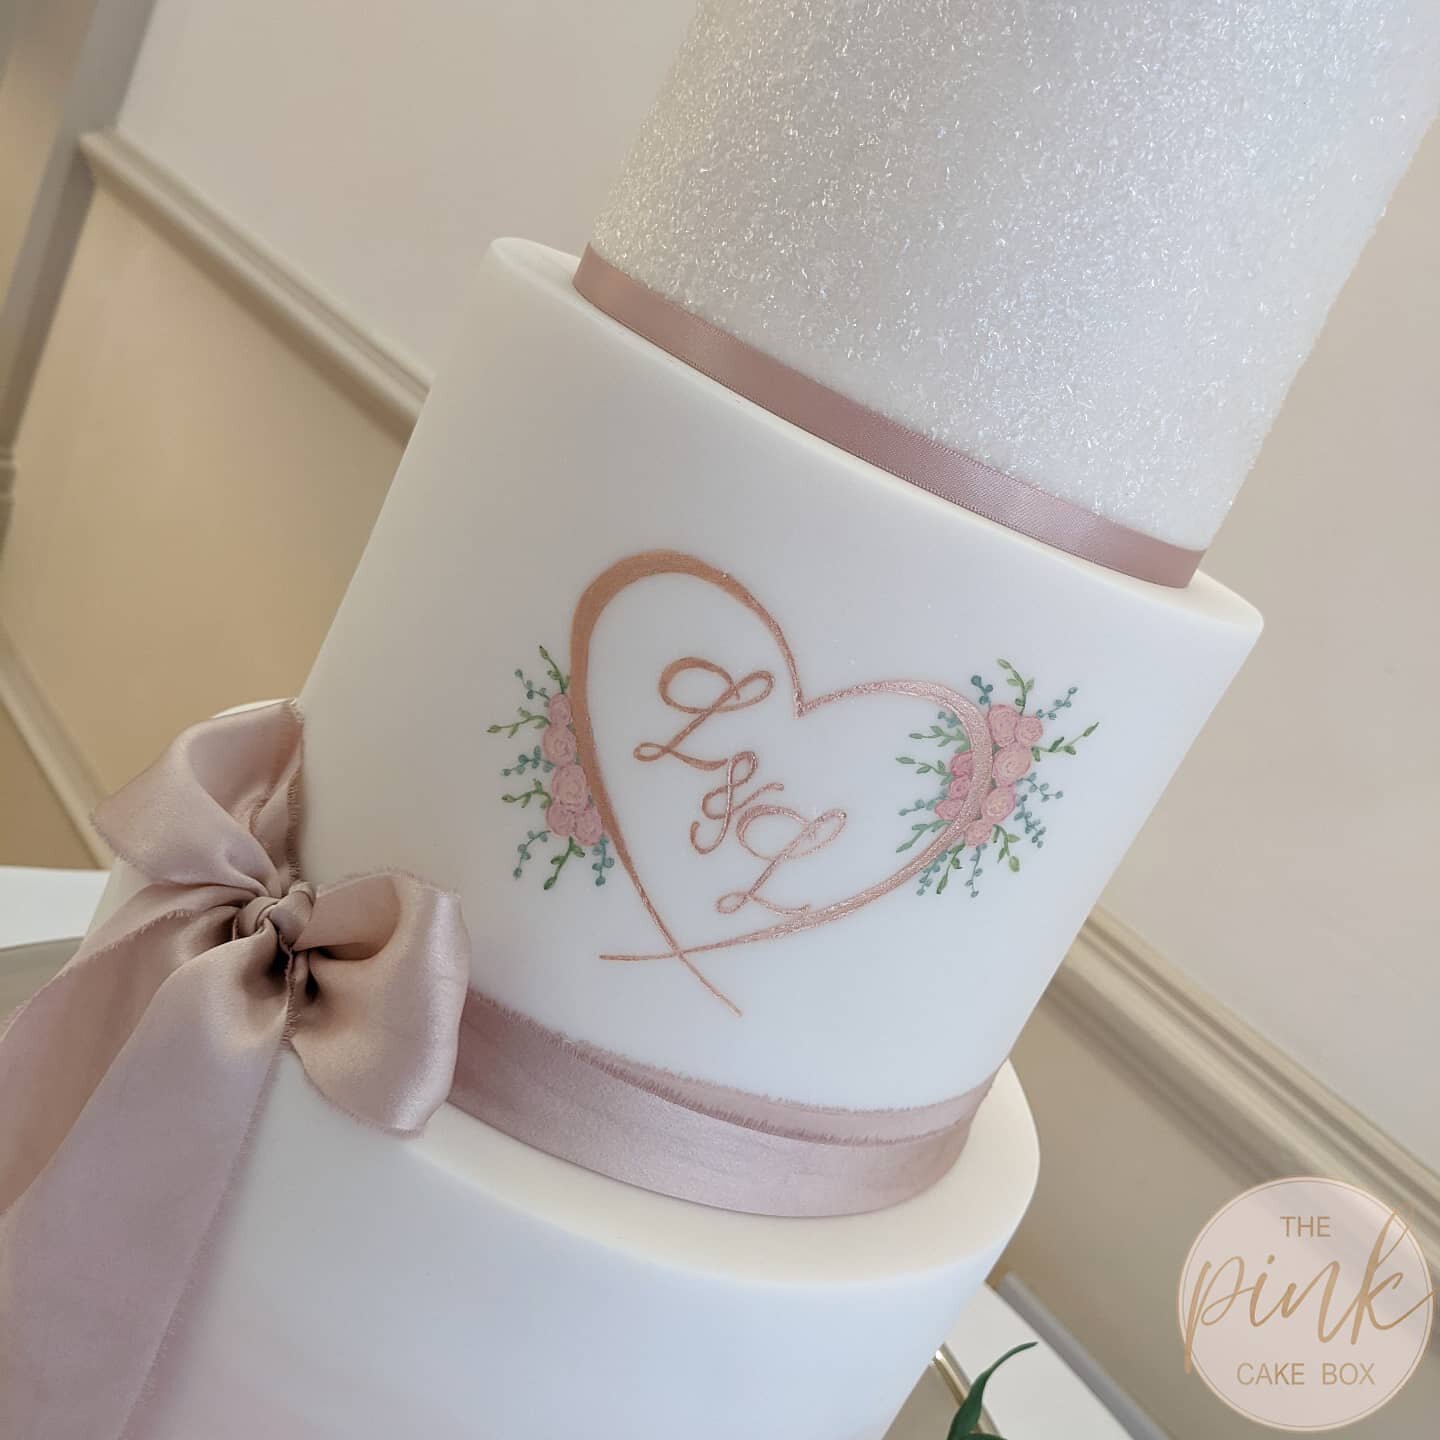 Happy wedding day to Laura and Lawrence celebrating today 😍 love their middle tier with rose gold heart to match the save the dates and initials to match their wax seal on the invites 😍 incorporated into the design with some hand painted roses and 